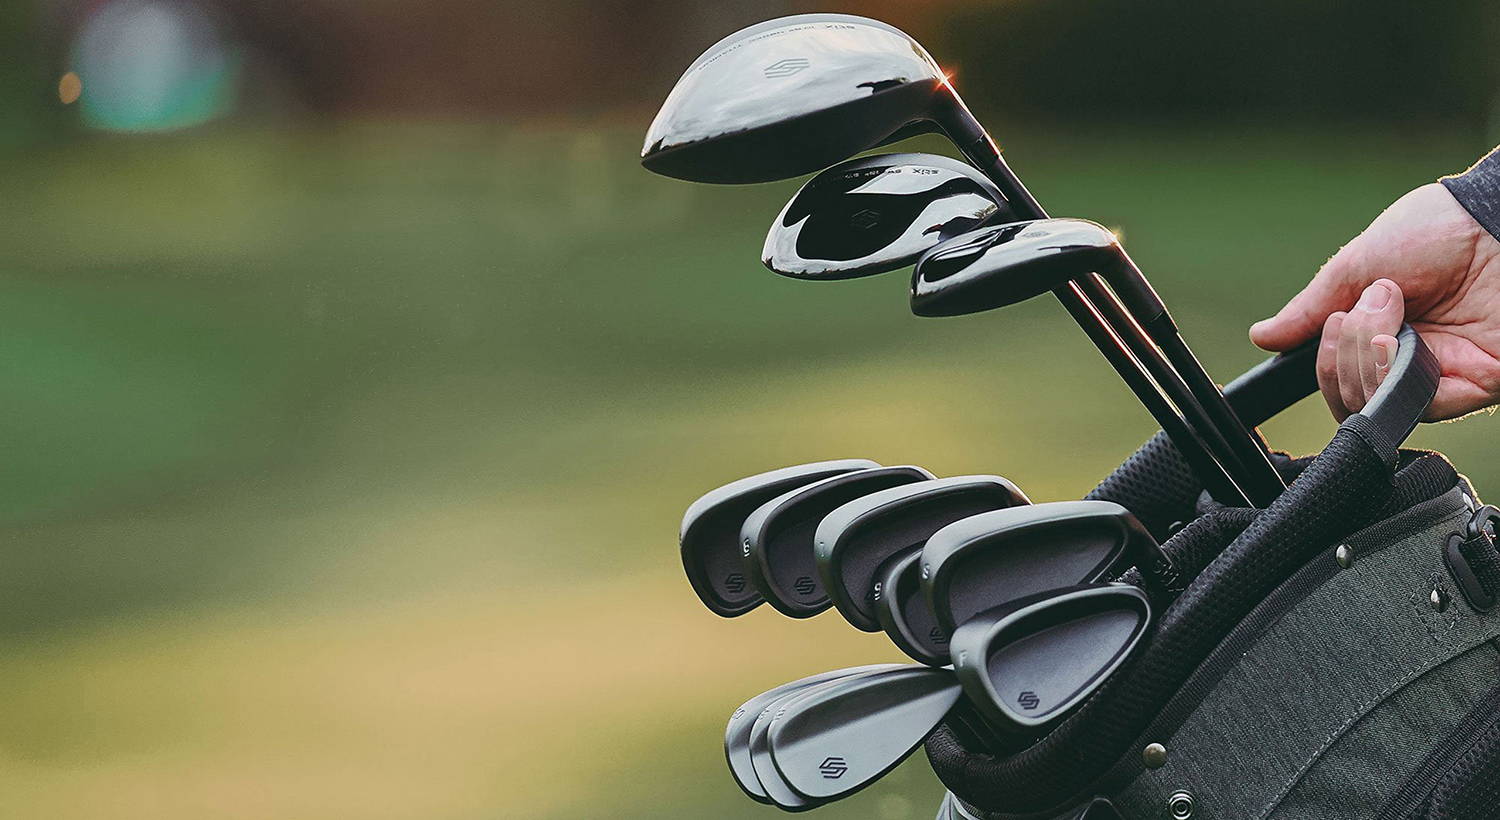 How Many Clubs Do You Need in a Golf Bag?